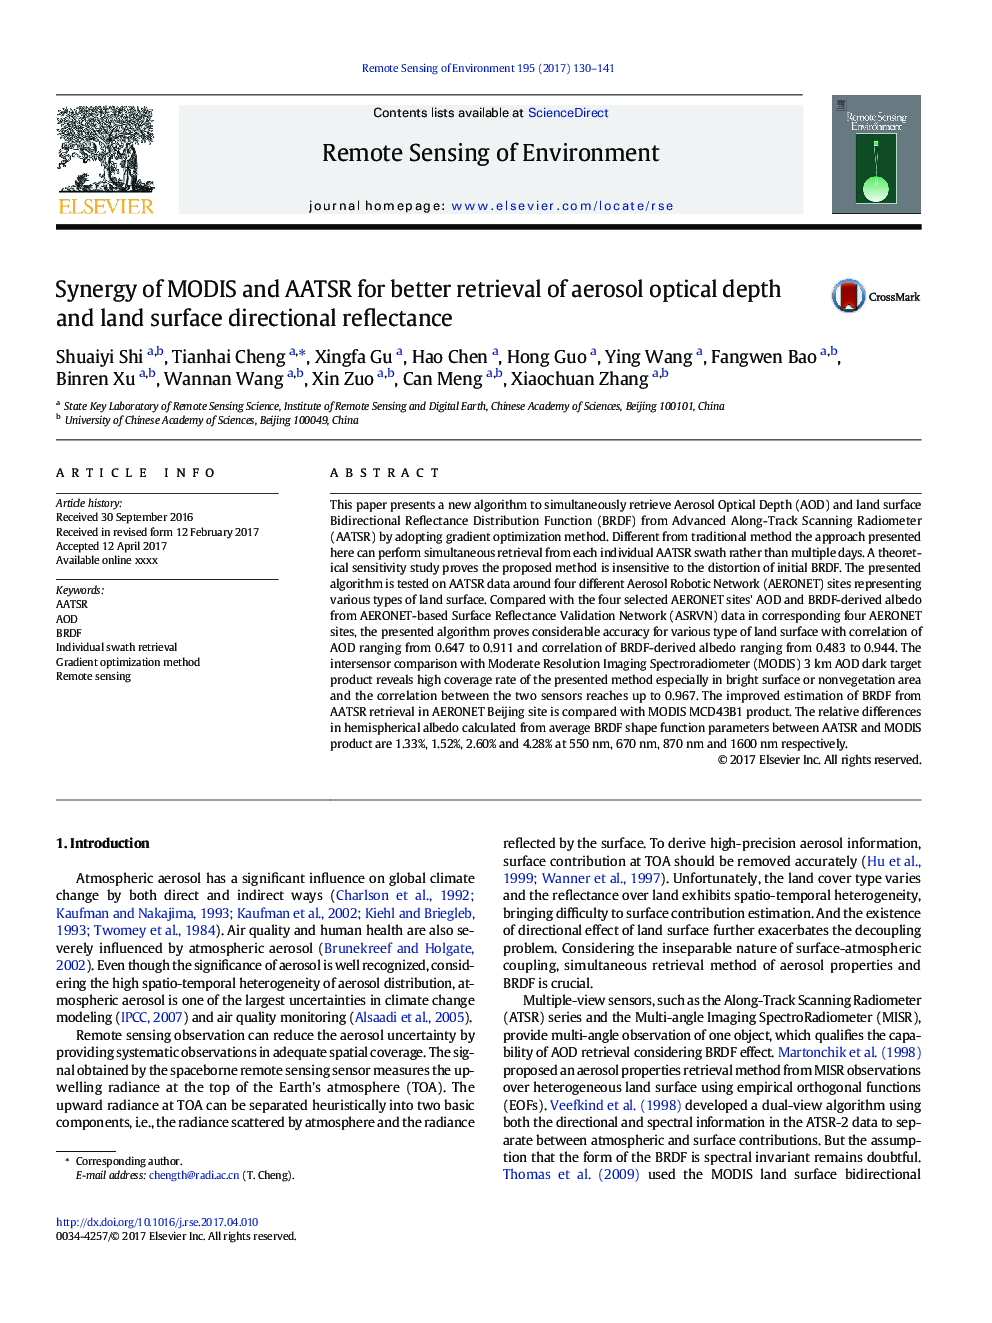 Synergy of MODIS and AATSR for better retrieval of aerosol optical depth and land surface directional reflectance